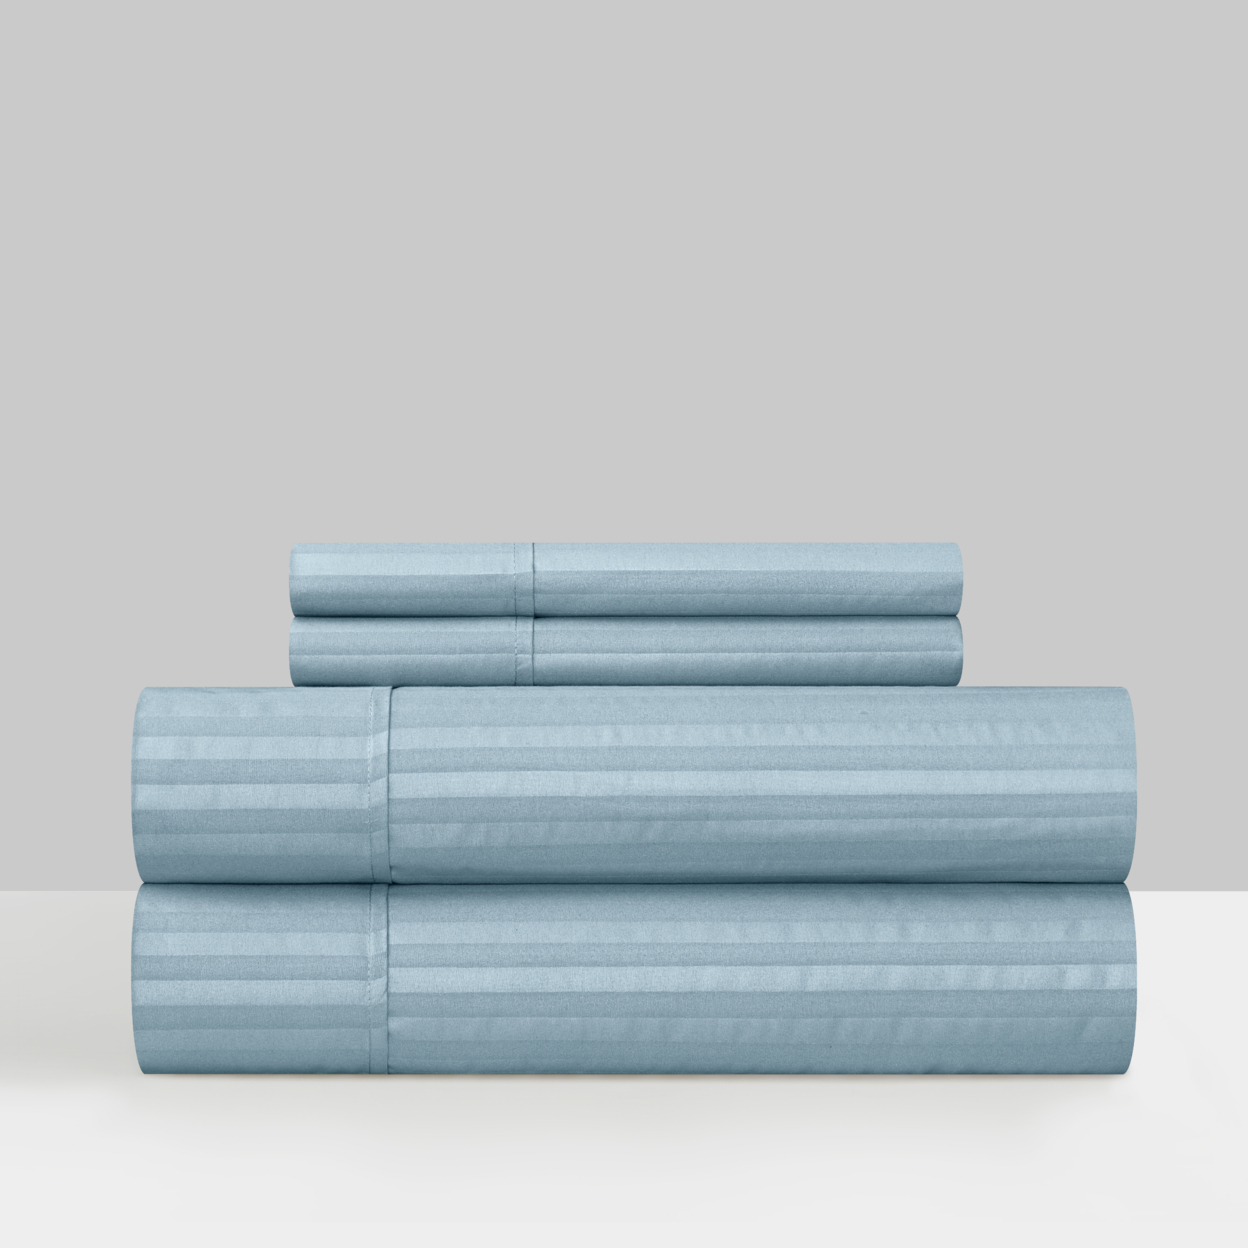 Shina 3 Or 4 Piece Sheet Set Solid Color Striped Pattern Technique - Blue, King